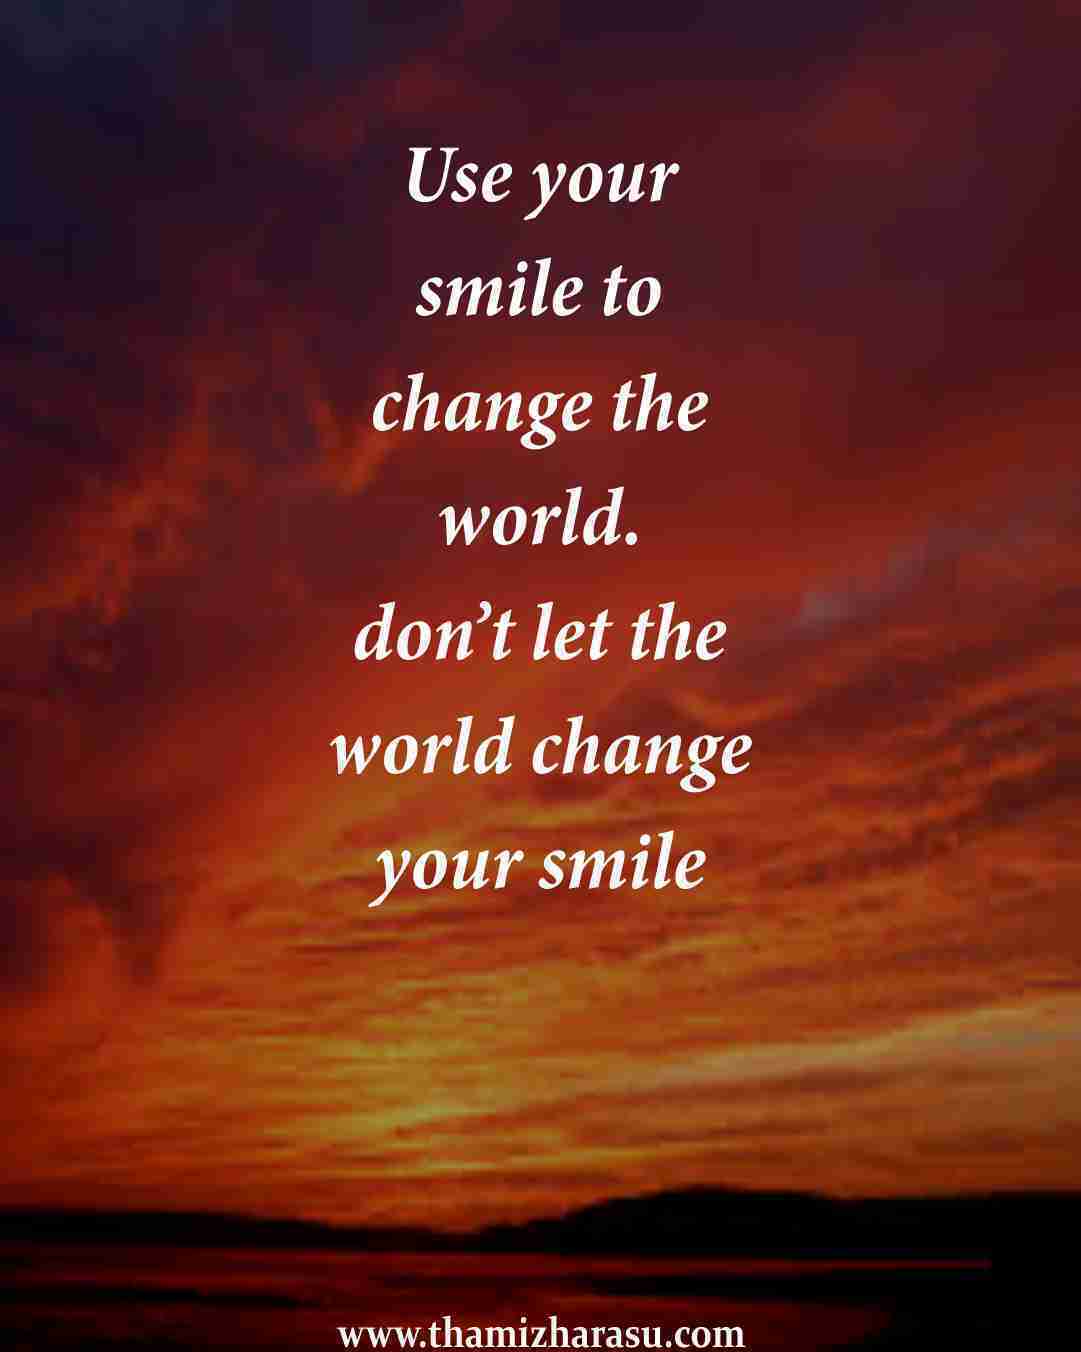 smile,smile attitude quotes,goals,life,change,motivation,motivational quotes,learning,smile quotes,habit,inspiration,inspirational,quotes,success,positive,happiness,actions,confidence,leadership,believe,achieve